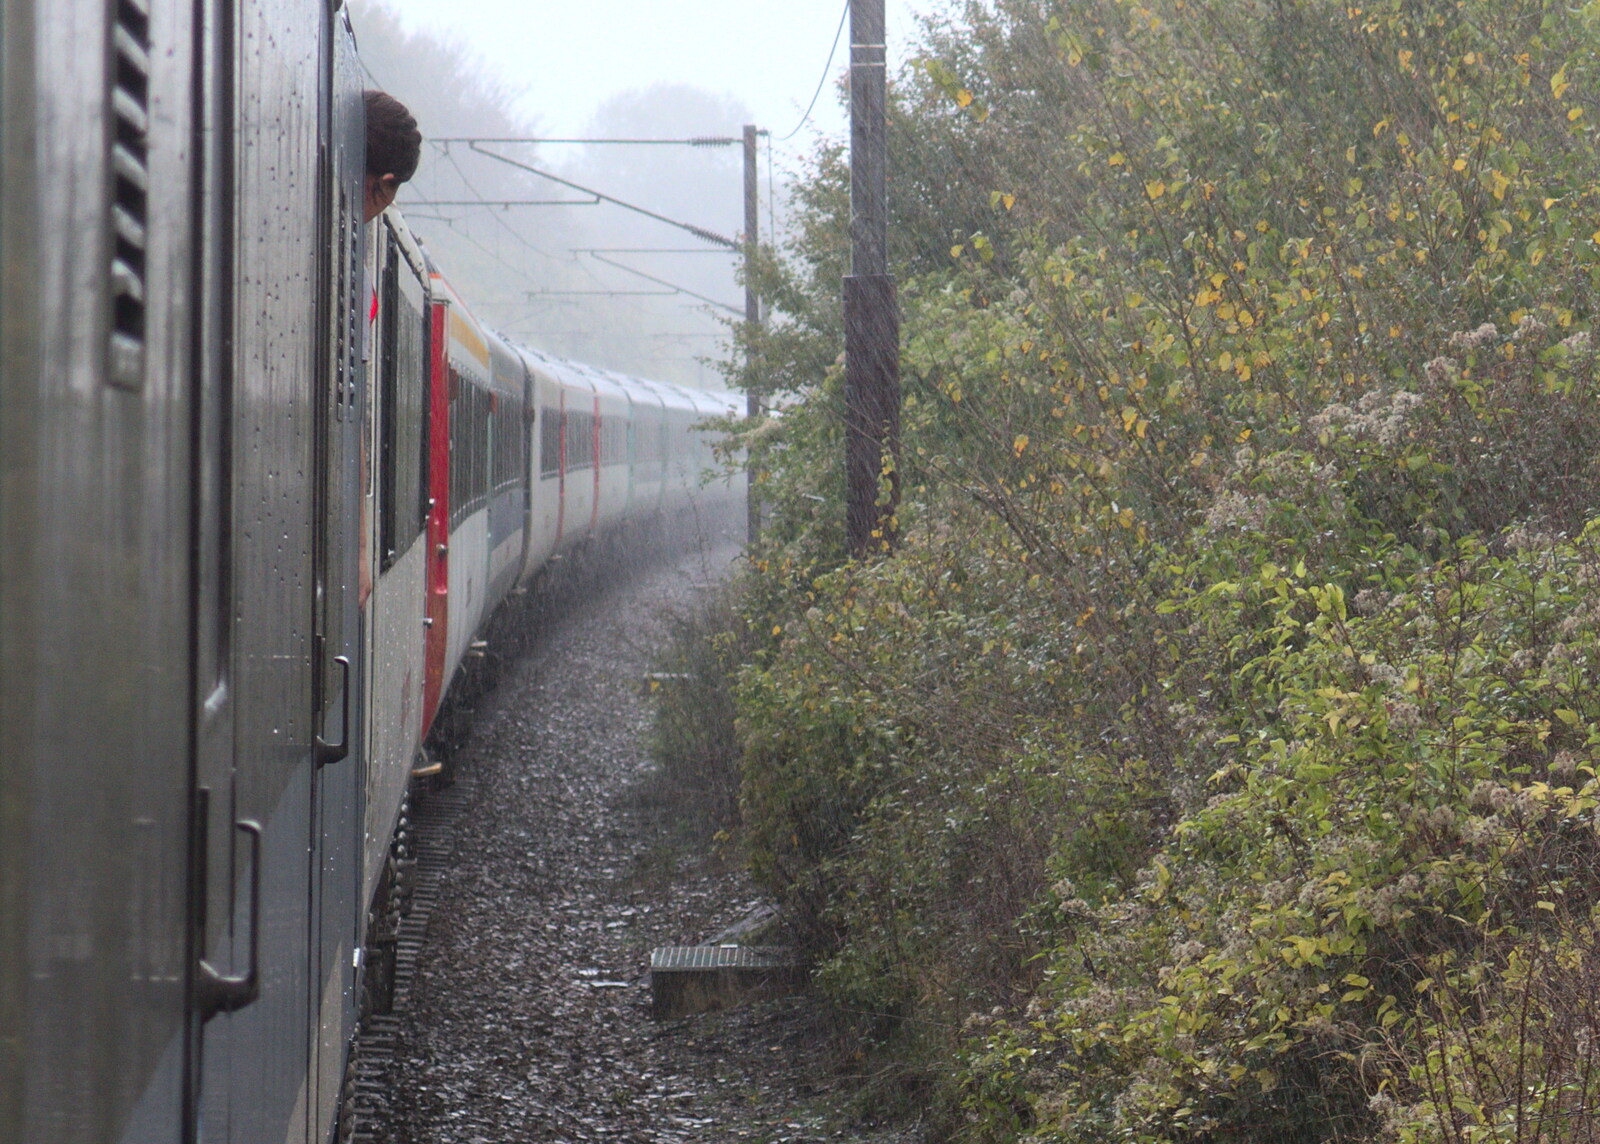 Just to add to the misery, it starts lashing from (Very) Long Train (Not) Running, Stowmarket, Suffolk - 21st October 2014